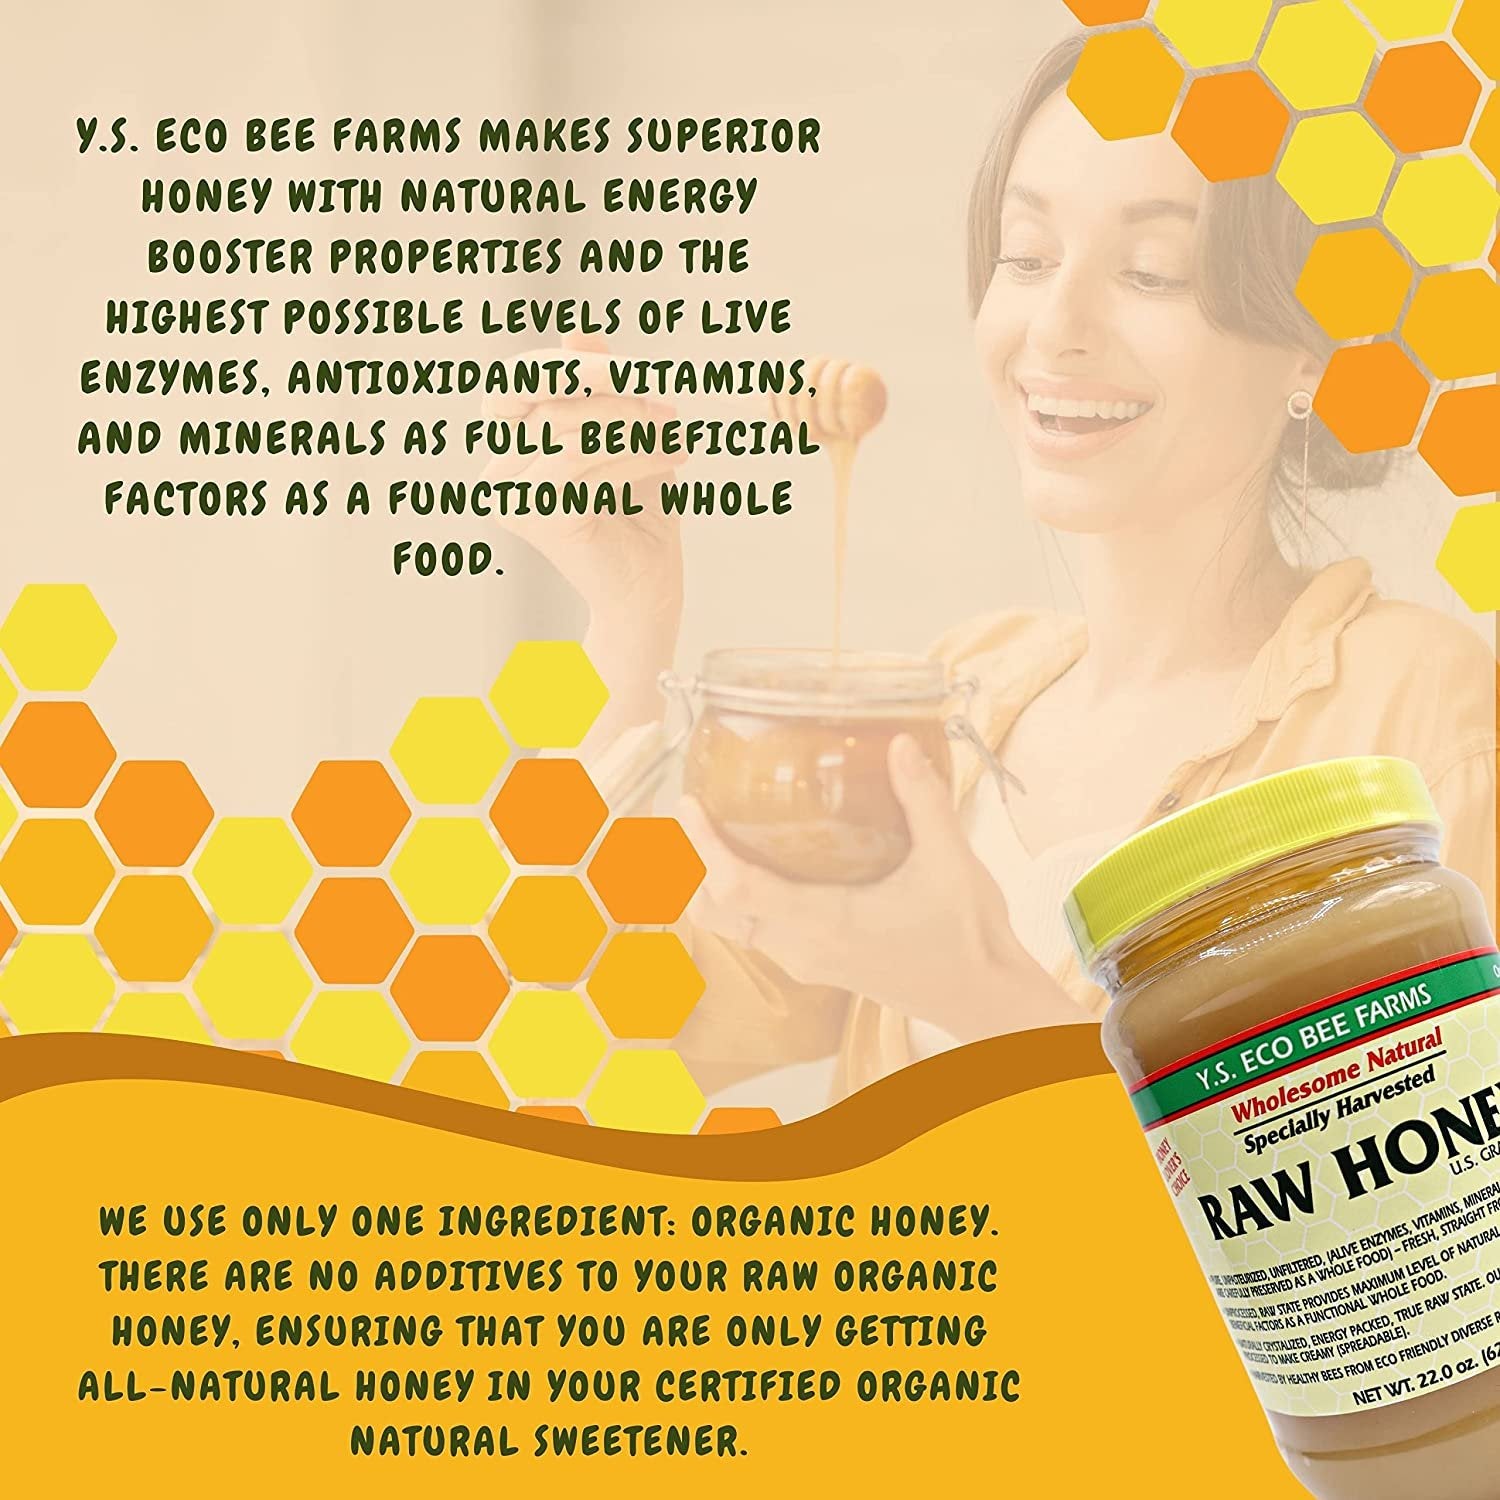 Y.S. Eco Bee Farms, Y.S. Organic Bee Farms, Wholesome Natural Raw Honey, Unpasteurized, Unfiltered, Fresh Raw State, Kosher, Pure, Natural, Healthy, Safe, Gluten Free, Specially Harvested, 22oz - 2pk